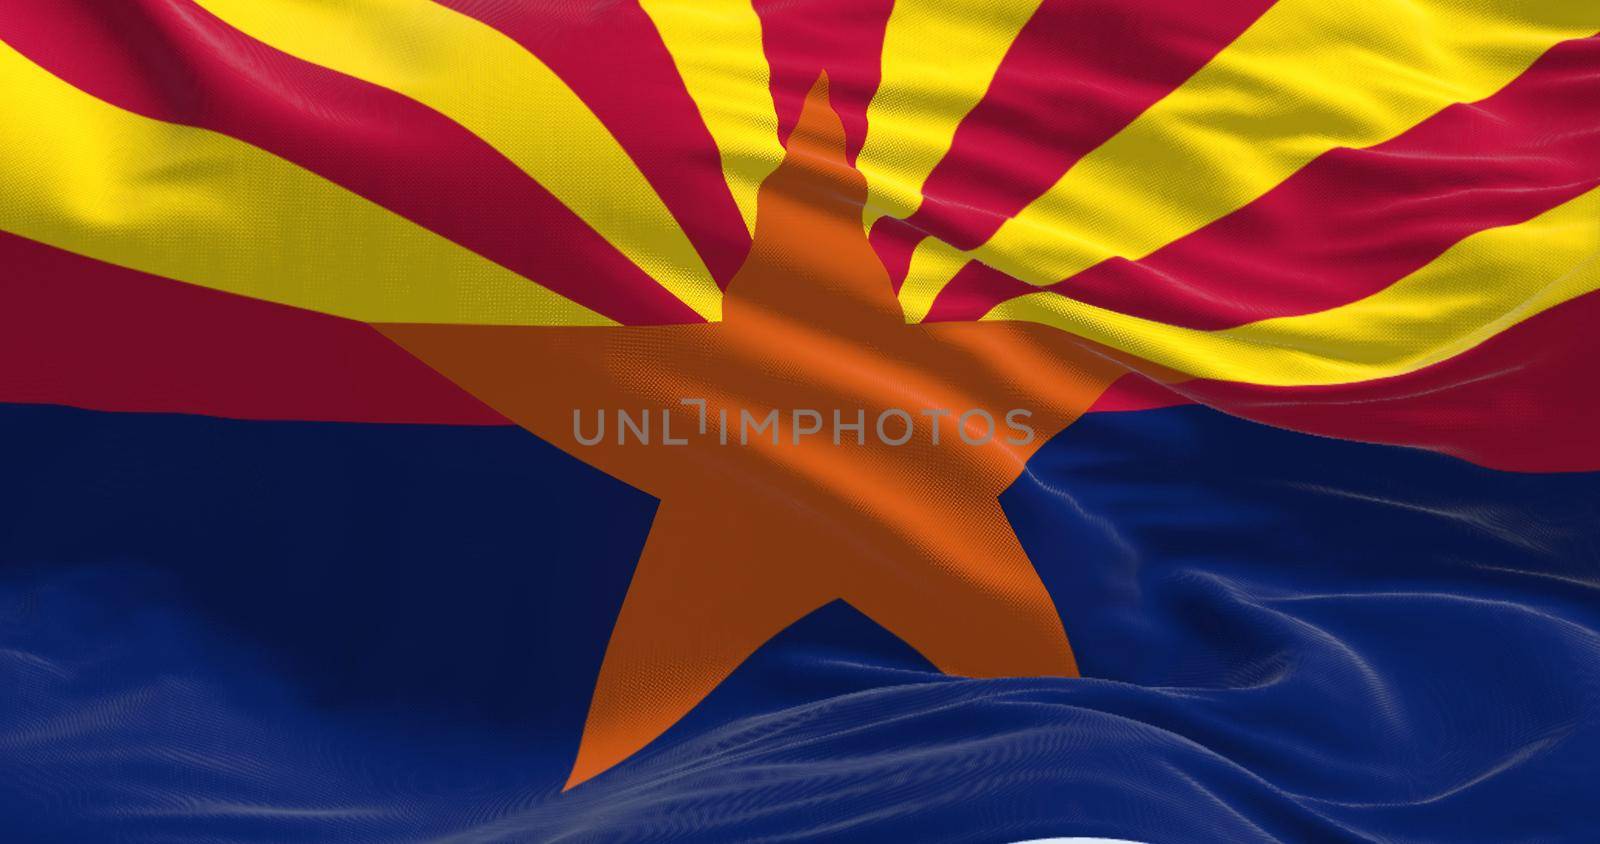 Close-up view of the Arizona state flag waving in the wind. Arizona is a state in the Western United States. Fabric textured background.